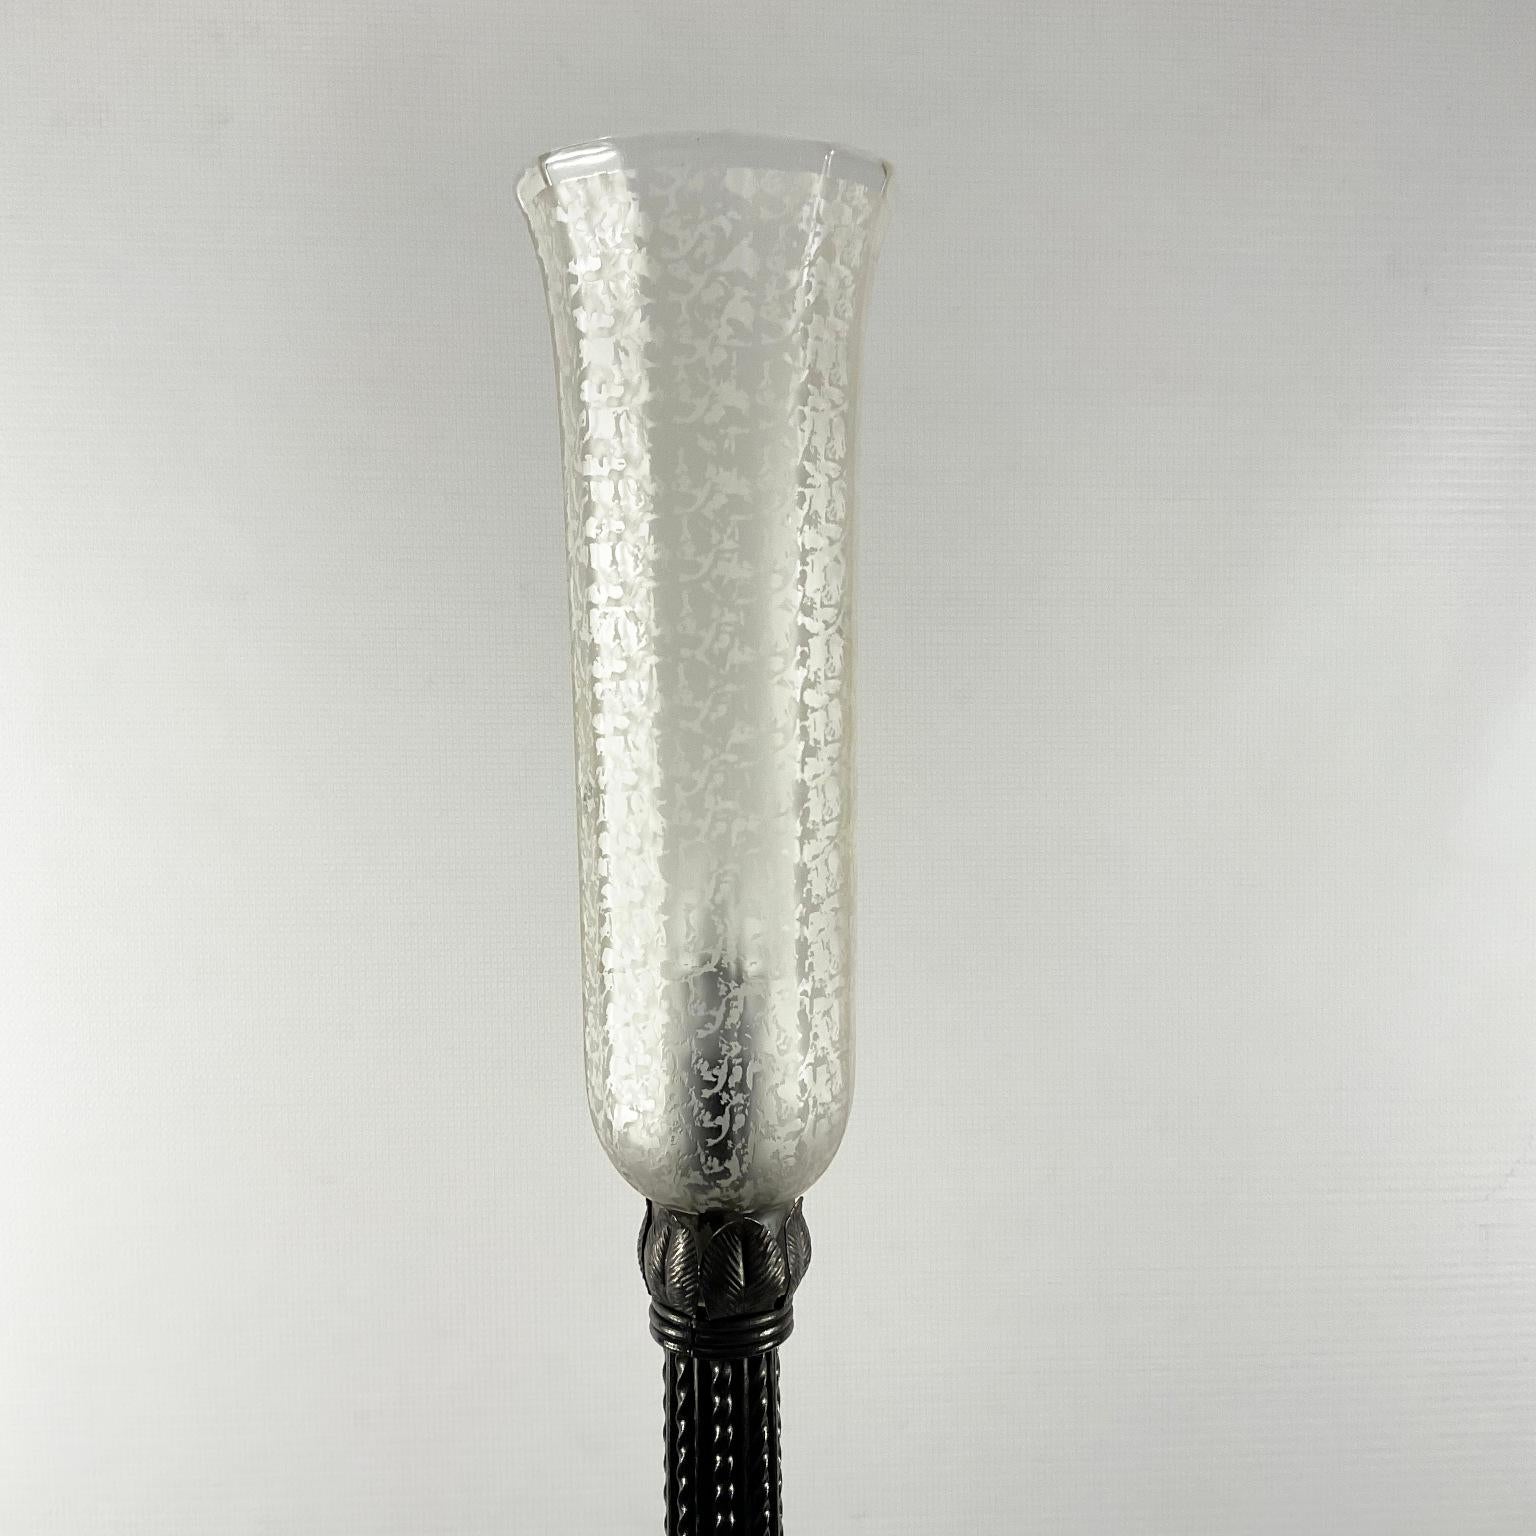 1920s French Art Deco Wrought Iron Floor Lamp with Frosted Glass Shade For Sale 3